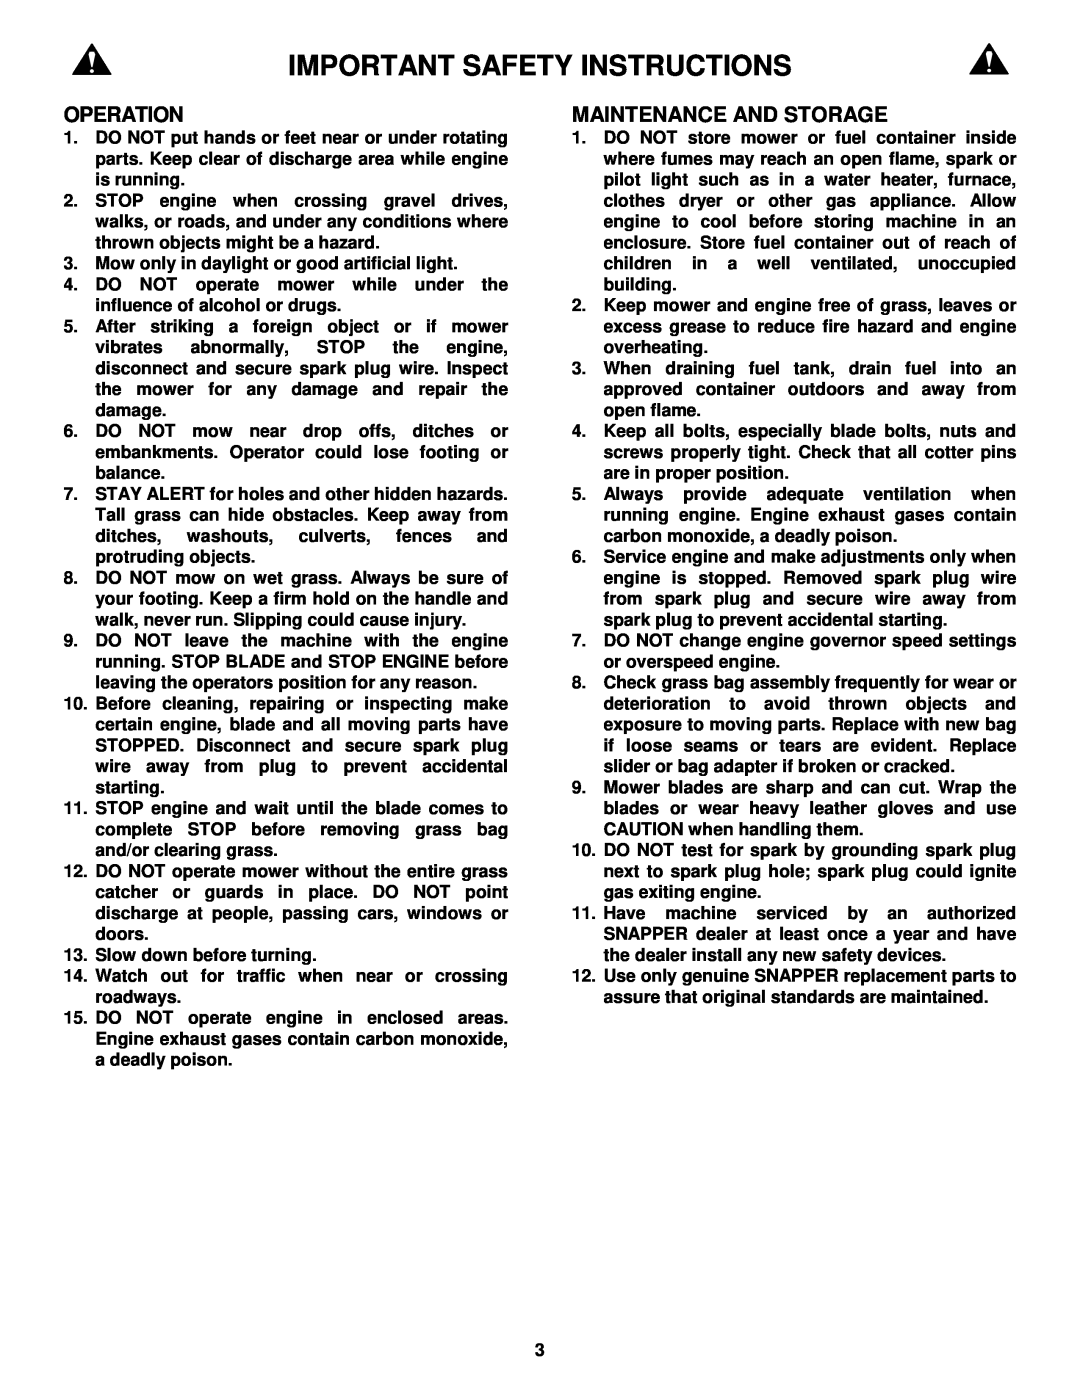 Snapper EFRP216516BV important safety instructions Important Safety Instructions, Operation, Maintenance And Storage 